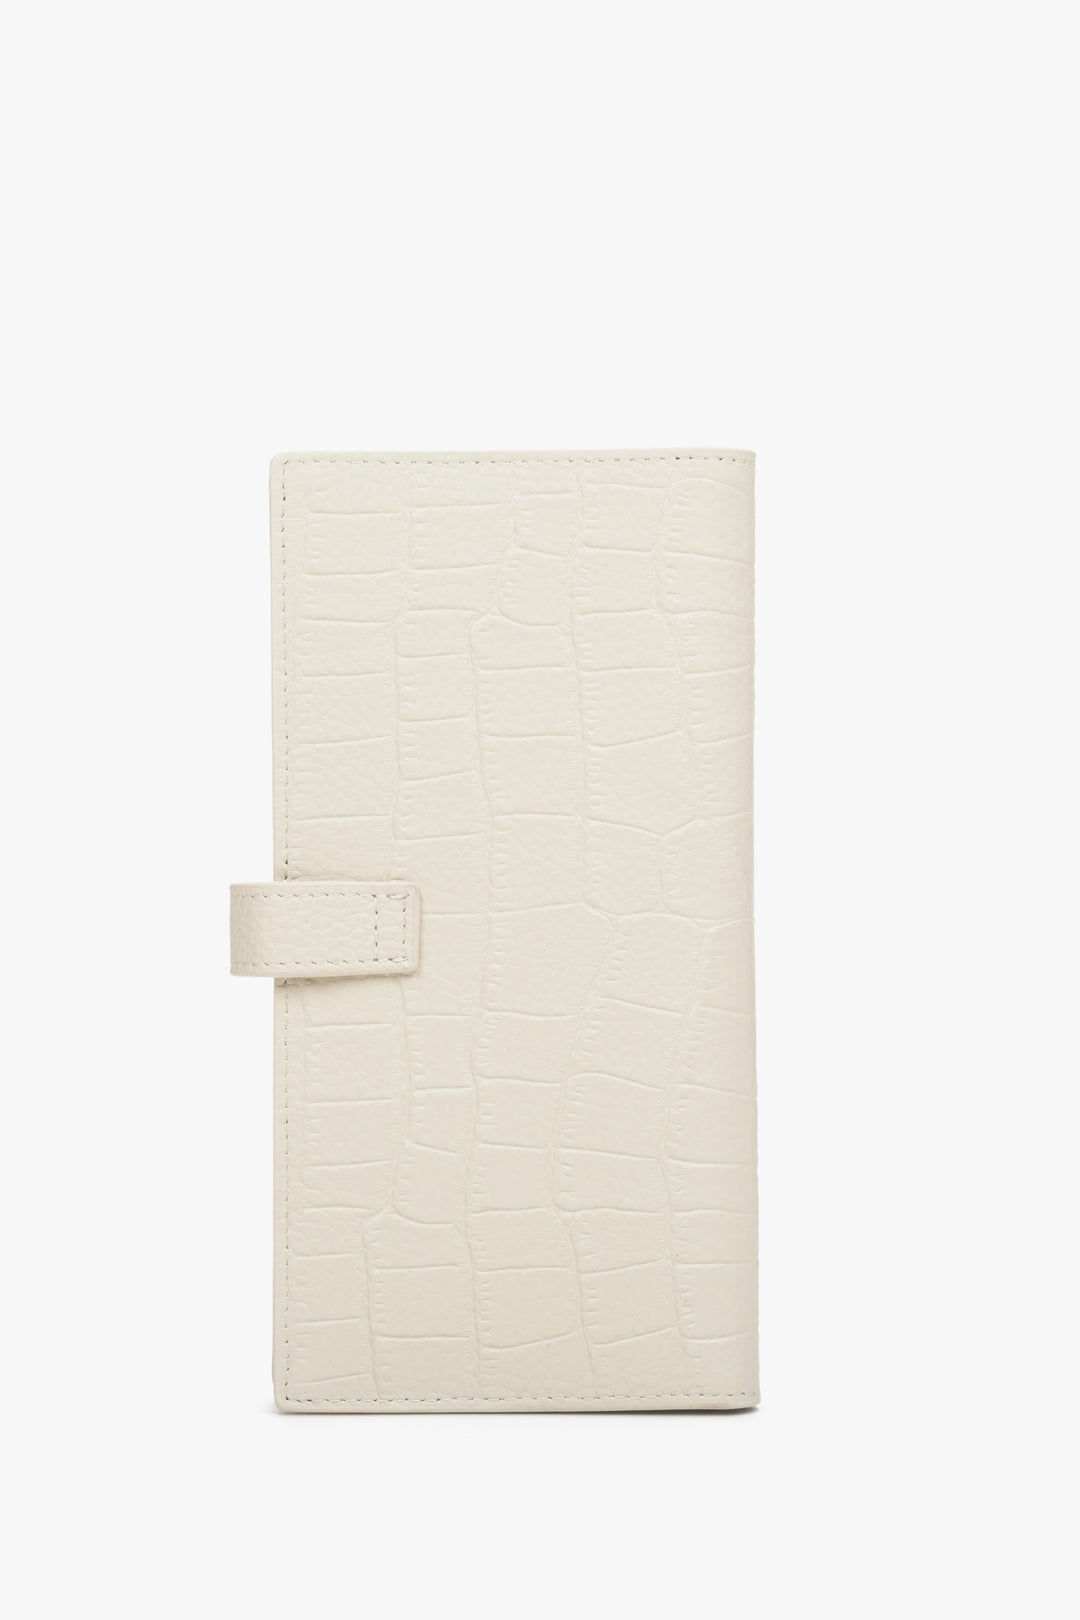 The back of a large light beige women's wallet made of embossed genuine leather with silver details by Estro.